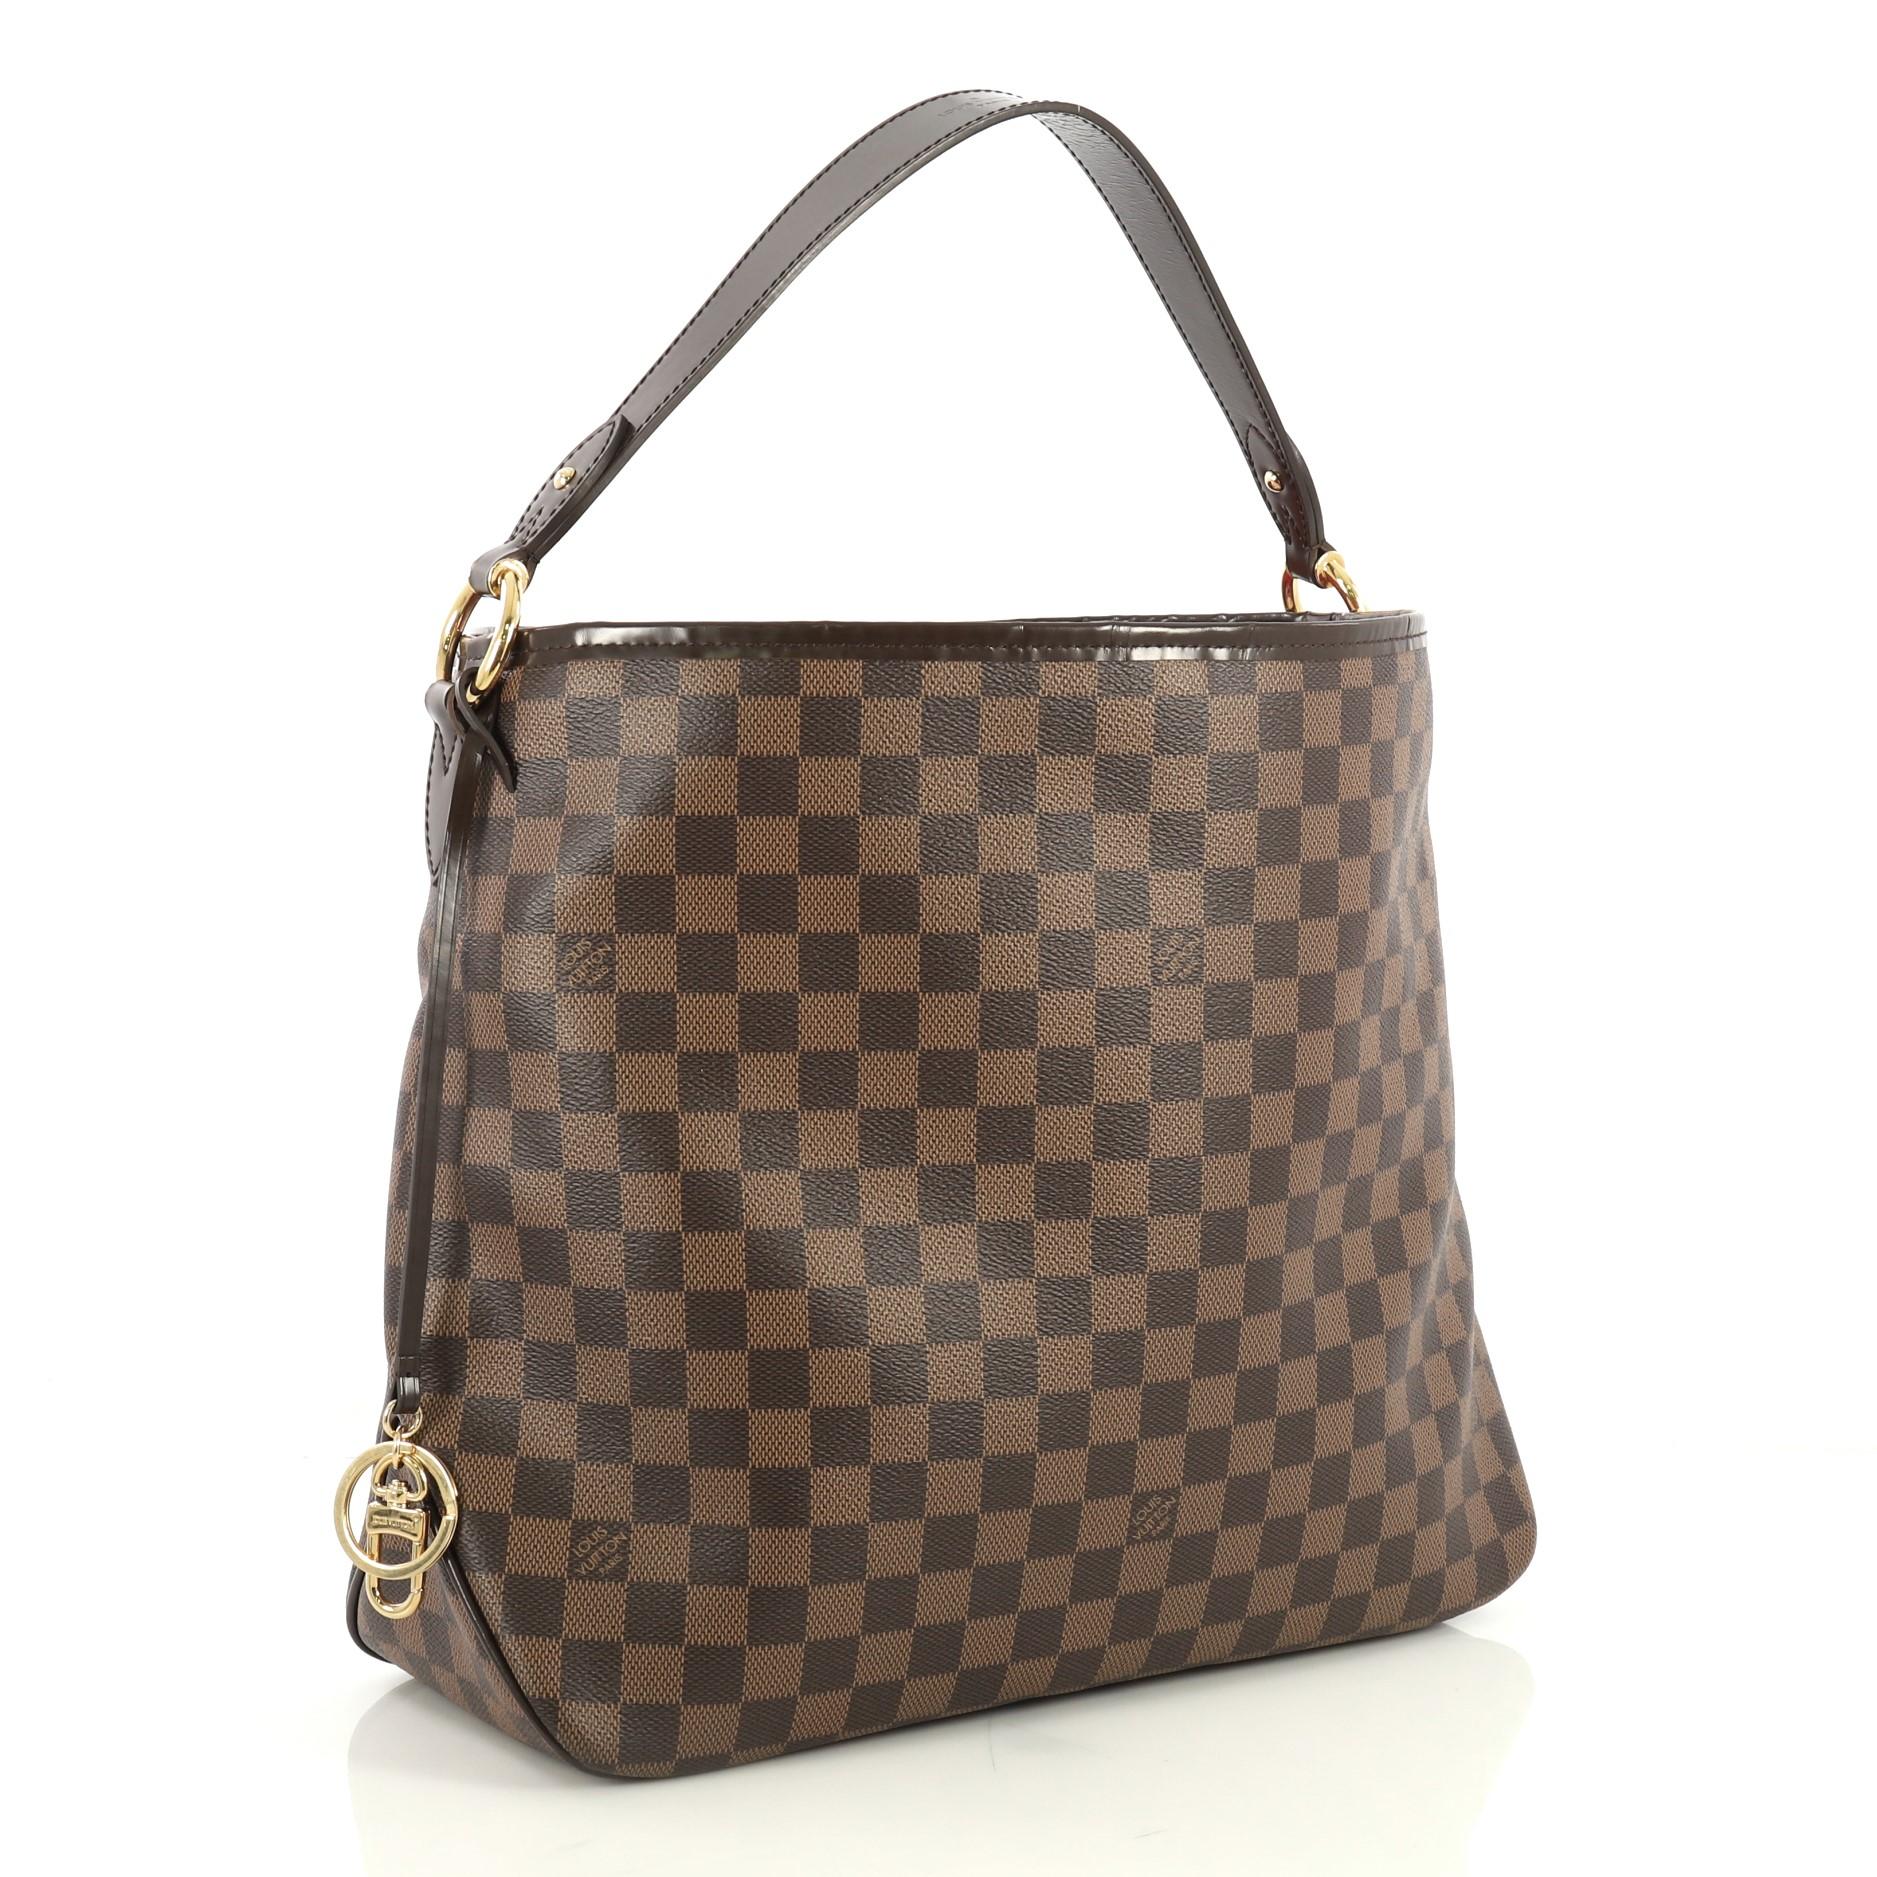 This Louis Vuitton Delightful NM Handbag Damier MM, crafted in damier ebene coated canvas, features a flat leather handle and gold-tone hardware. Its hook closure opens to a red fabric interior with side zip pocket. Authenticity code reads: MI4175.